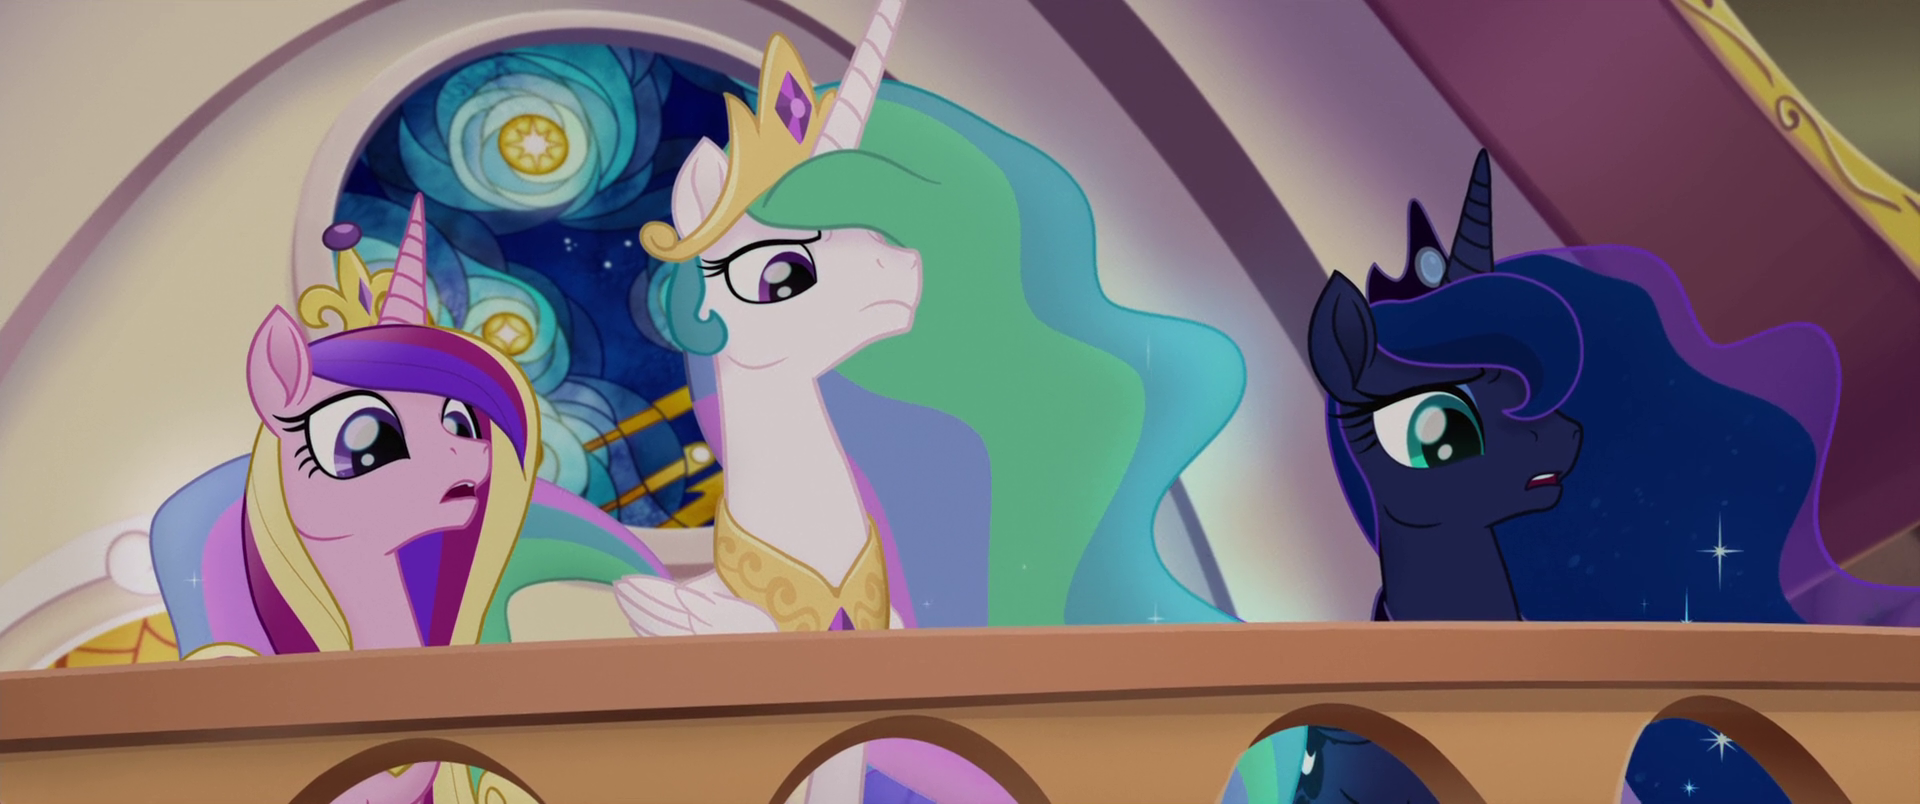 Image - Celestia, Luna, and Cadance watch from the balcony 